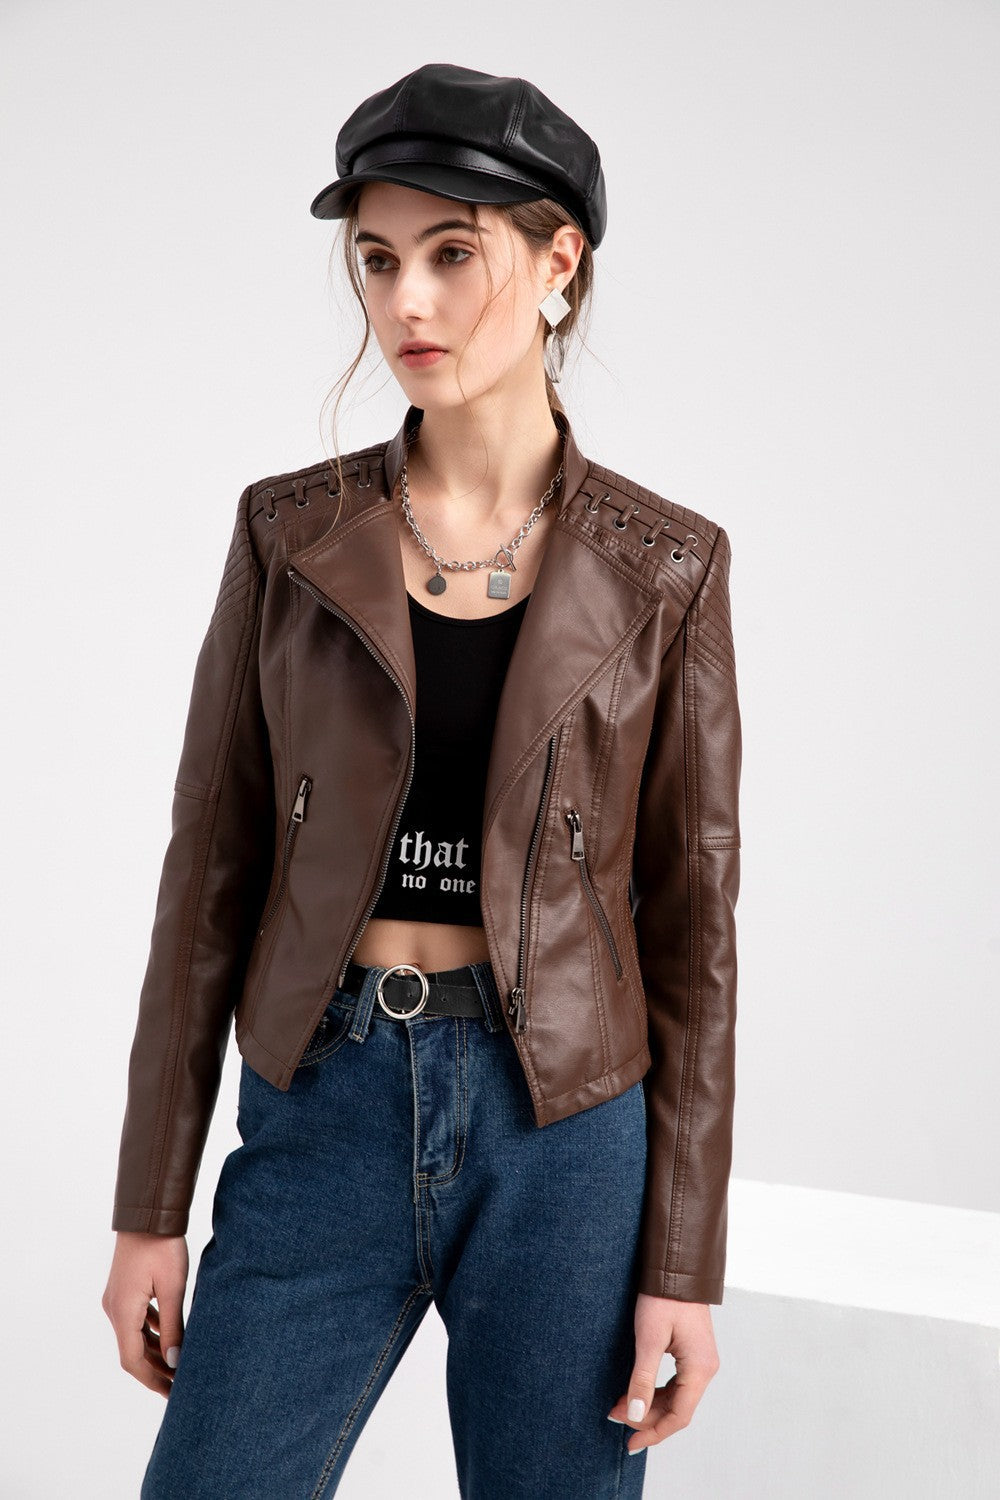 Youth European And American Women's Clothing Leather Short Jacket